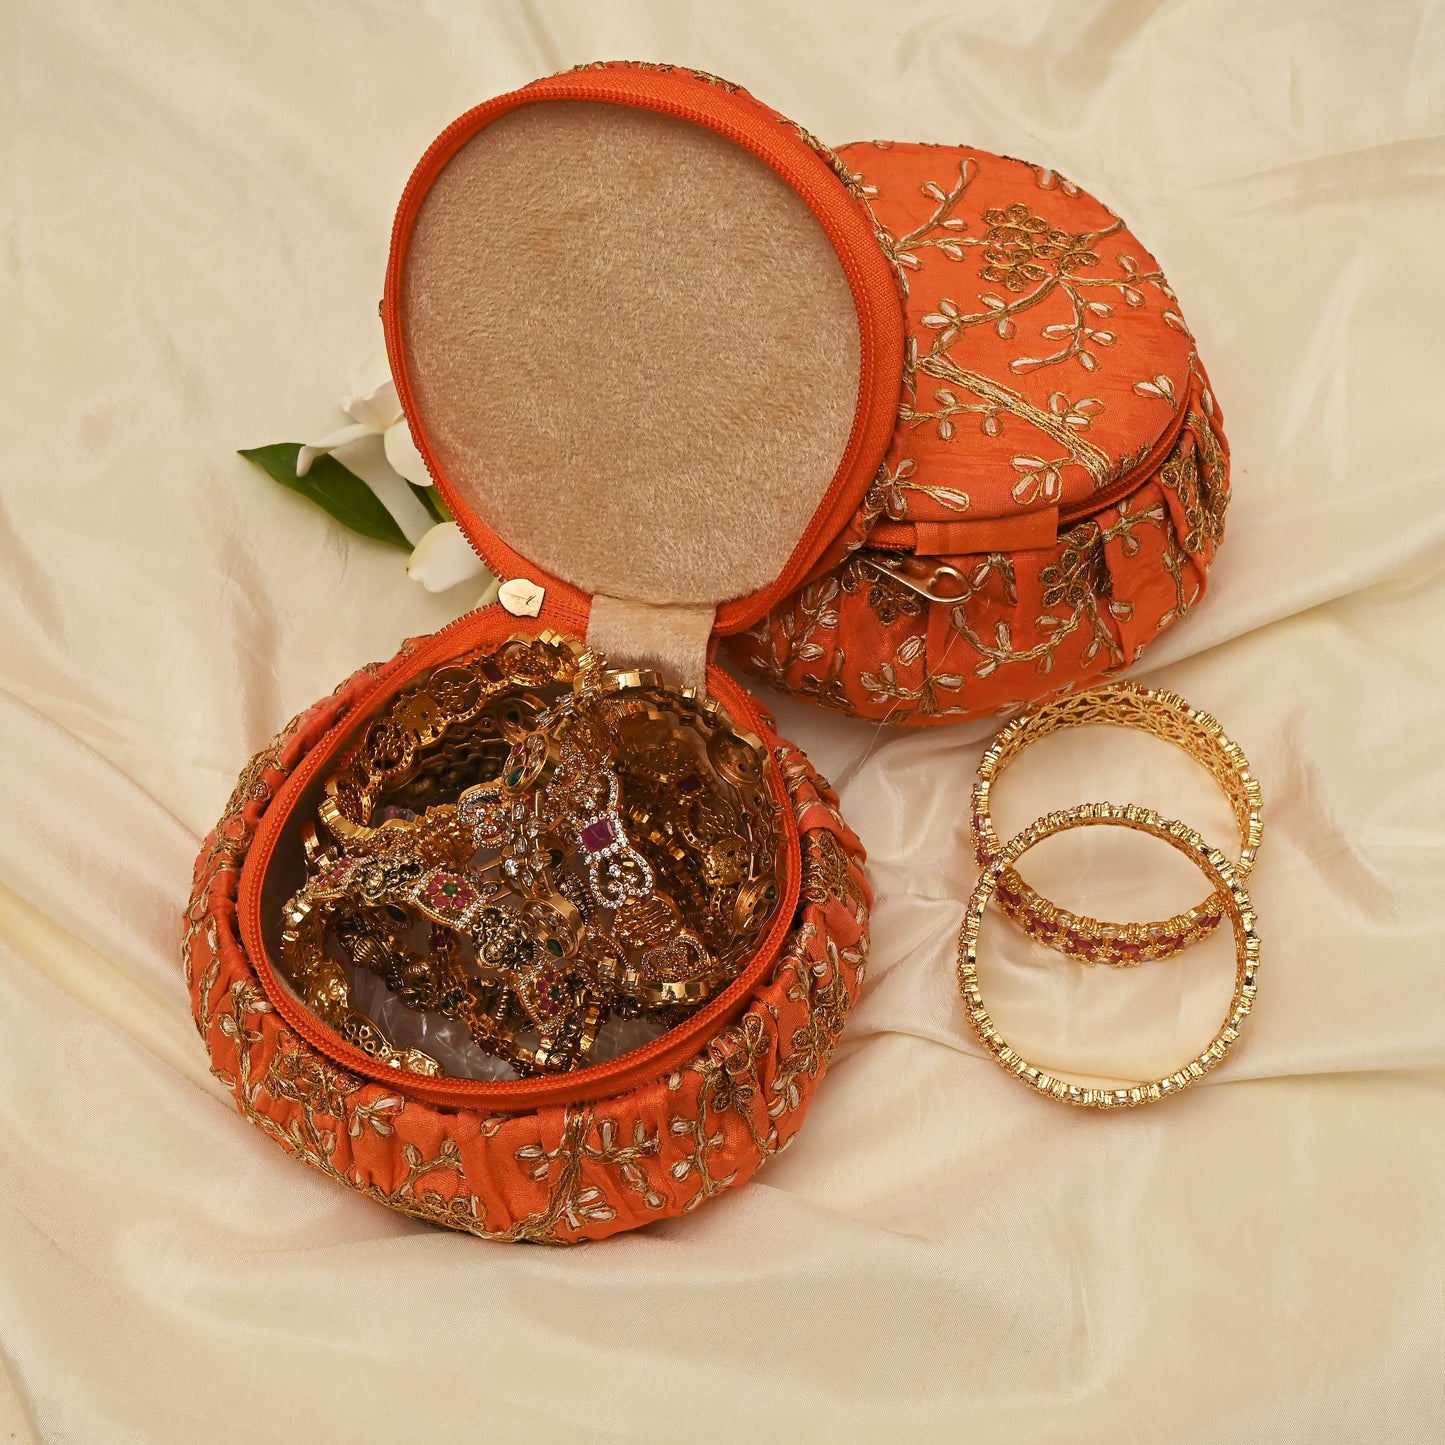 Exquisite Embroidered Silk Fabric Big Matki Bangle Box - The Perfect Return Gift For All Ages - Orange